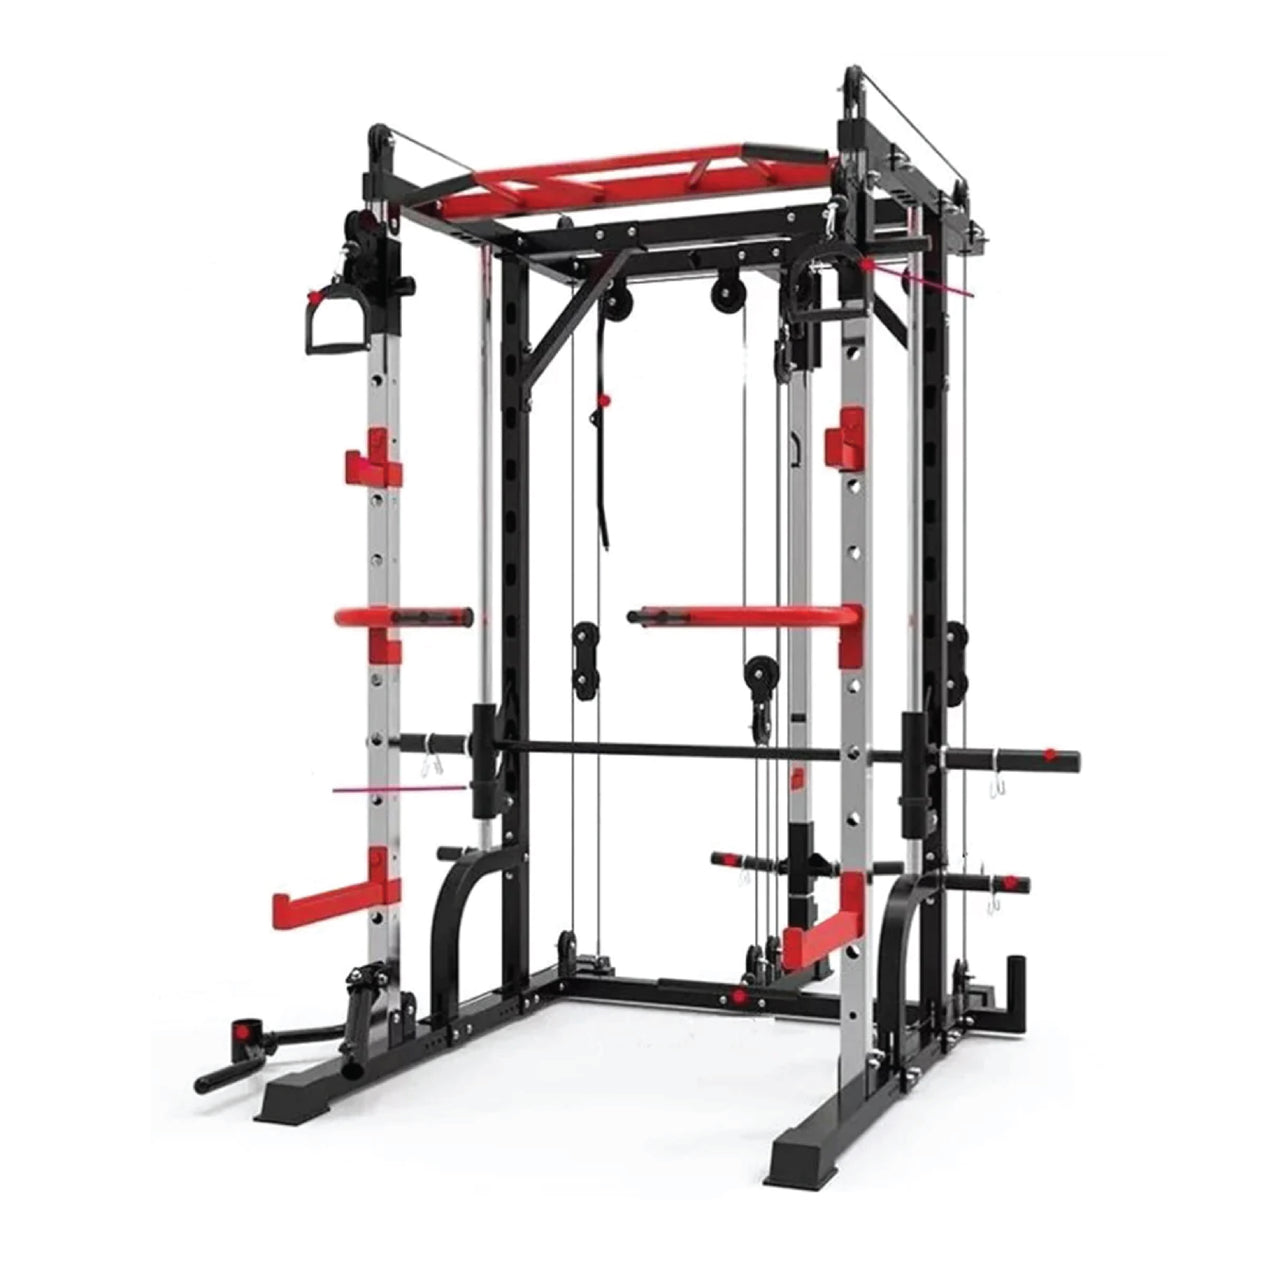 Combo Deal - 1441 Fitness Smith Machine with Functional Trainer J009 + 80kg Tri Grip Plate Set + Adjustable Bench A8007 + Flooring